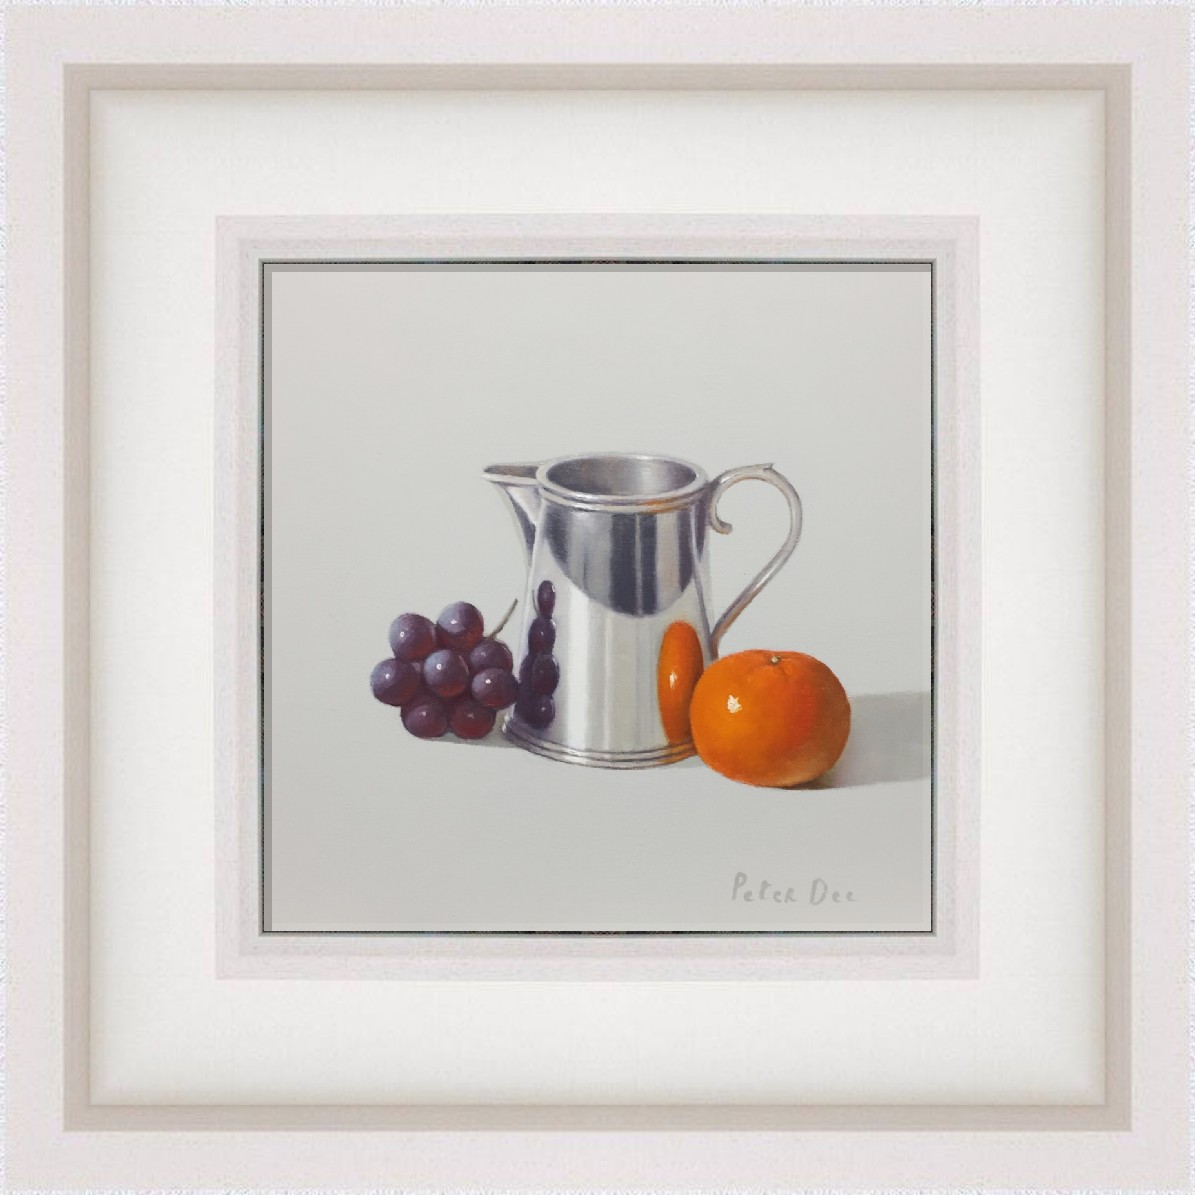 Silver and Fruit Still Life by Peter Dee